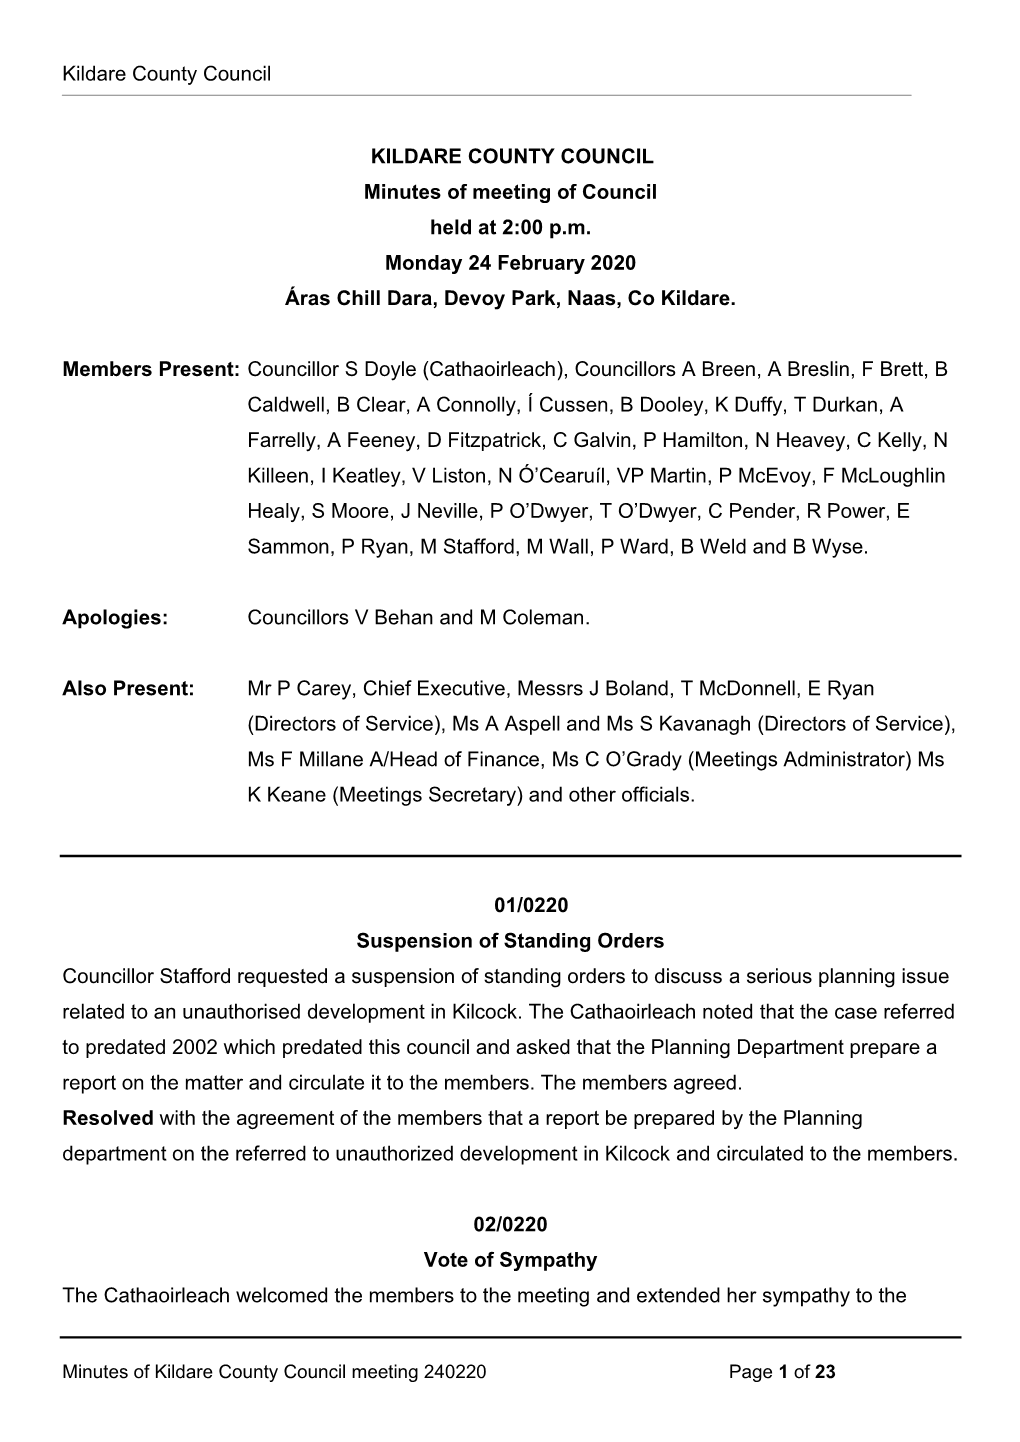 Minutes for Kildare County Council Meeting 24 February 2020